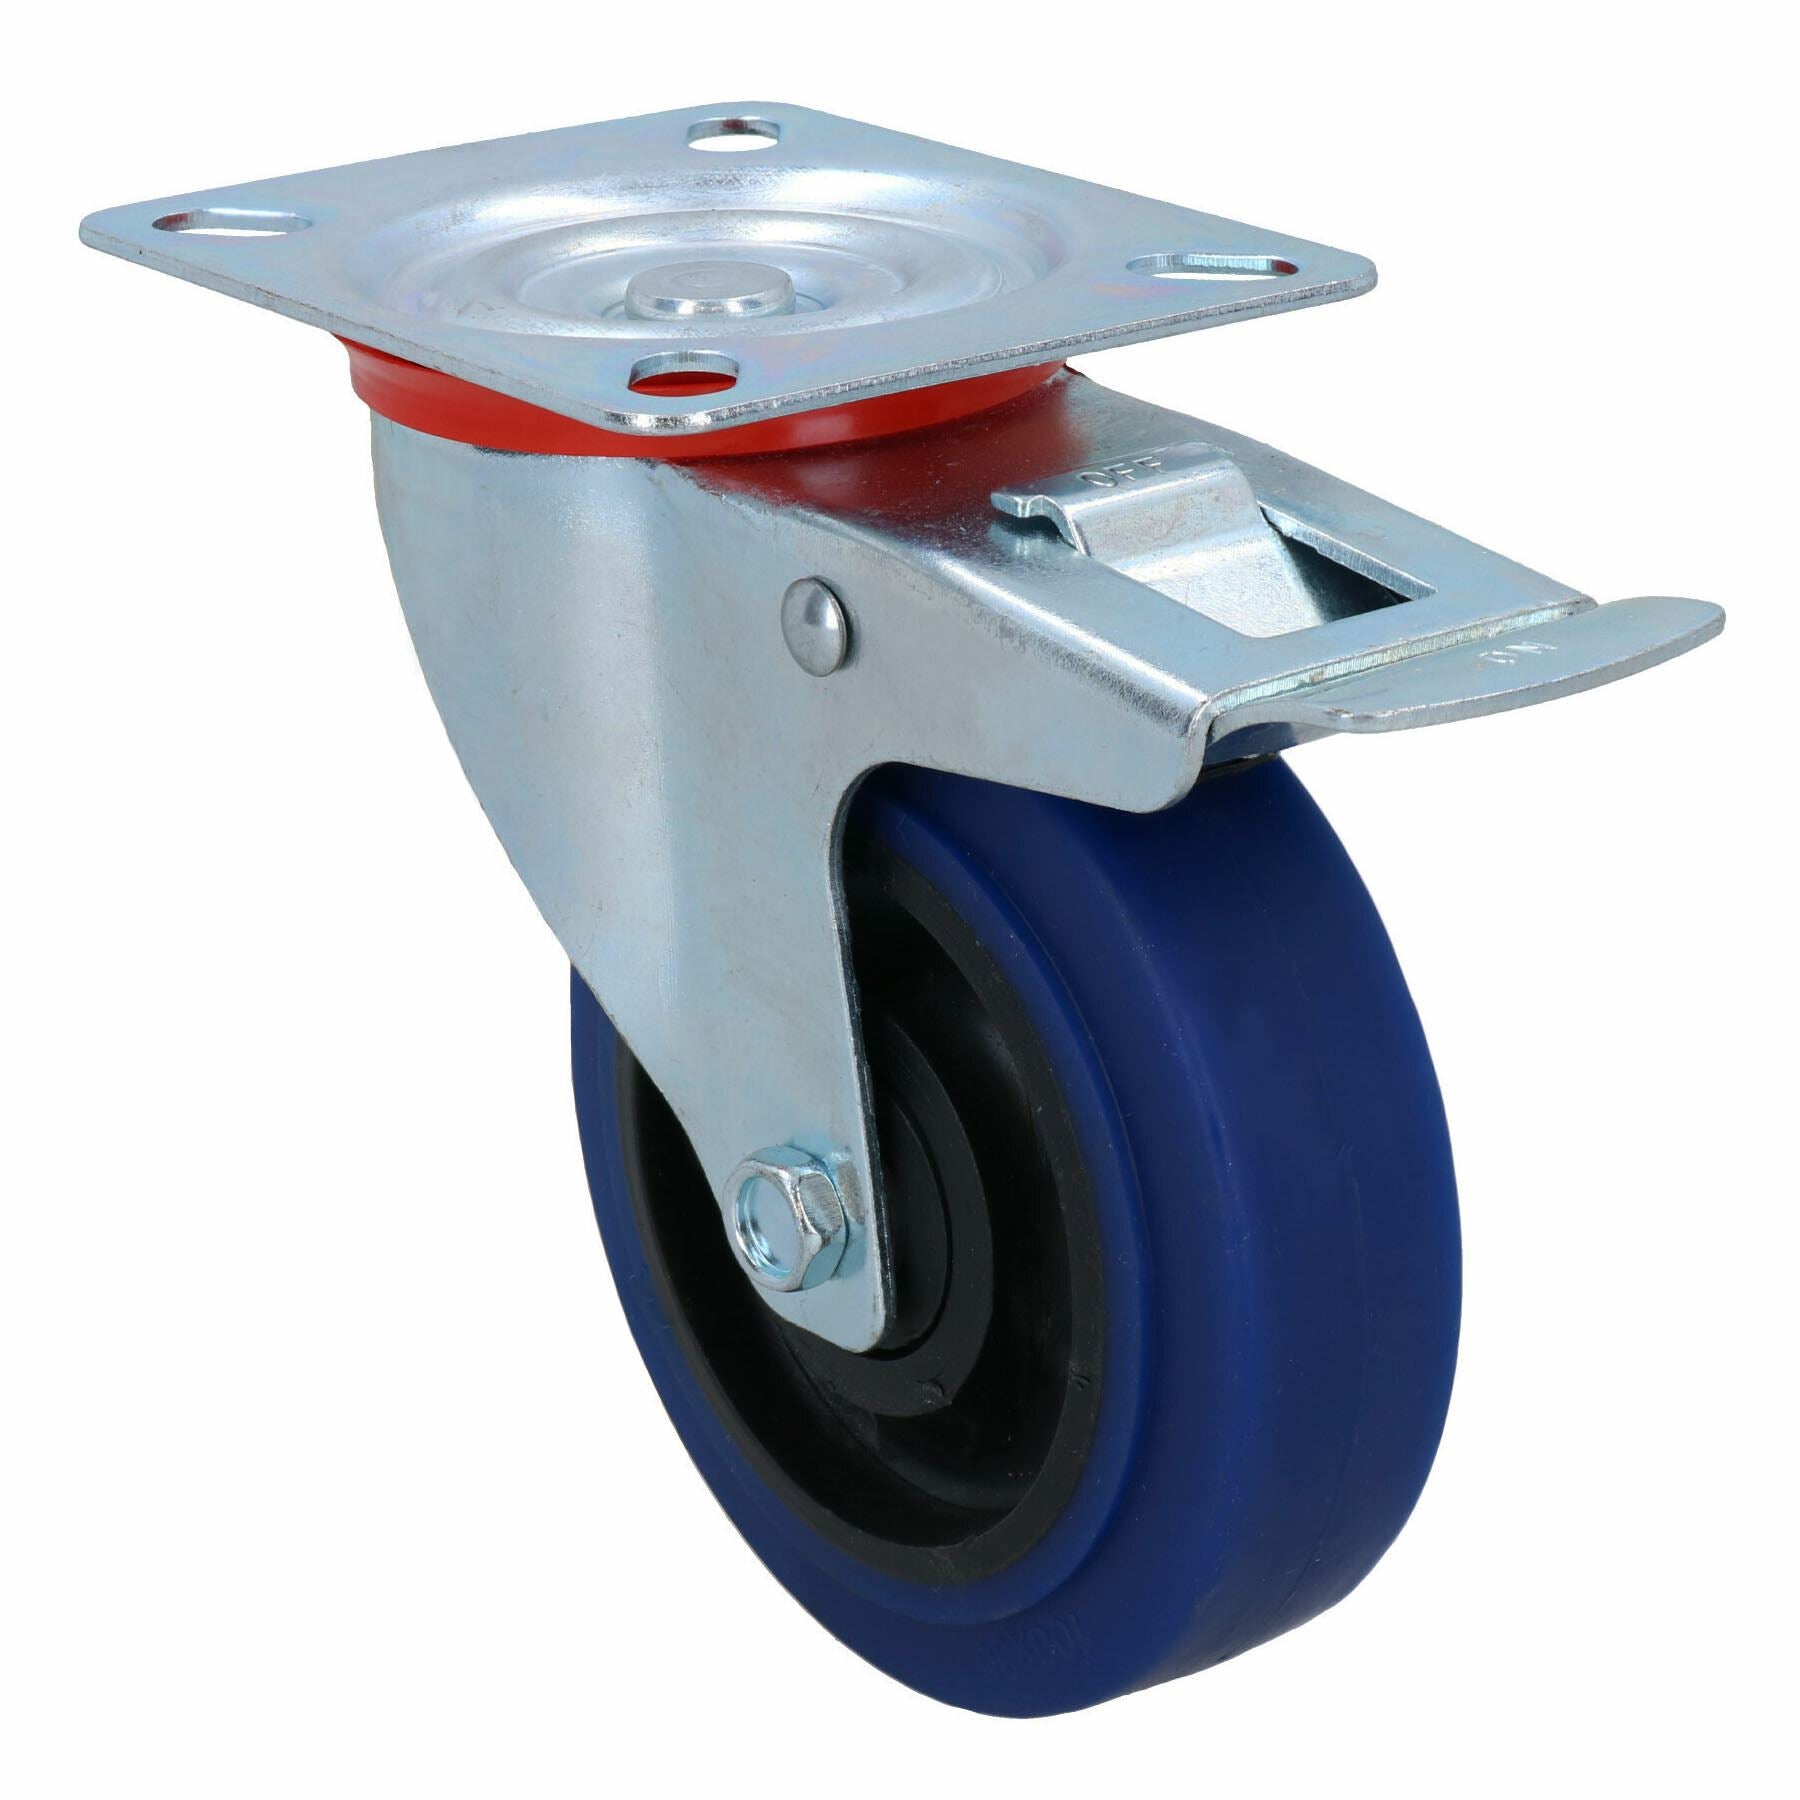 100mm Braked Swivel Castor Wheel with Elastic Rubber Tyre for Trolleys Carts